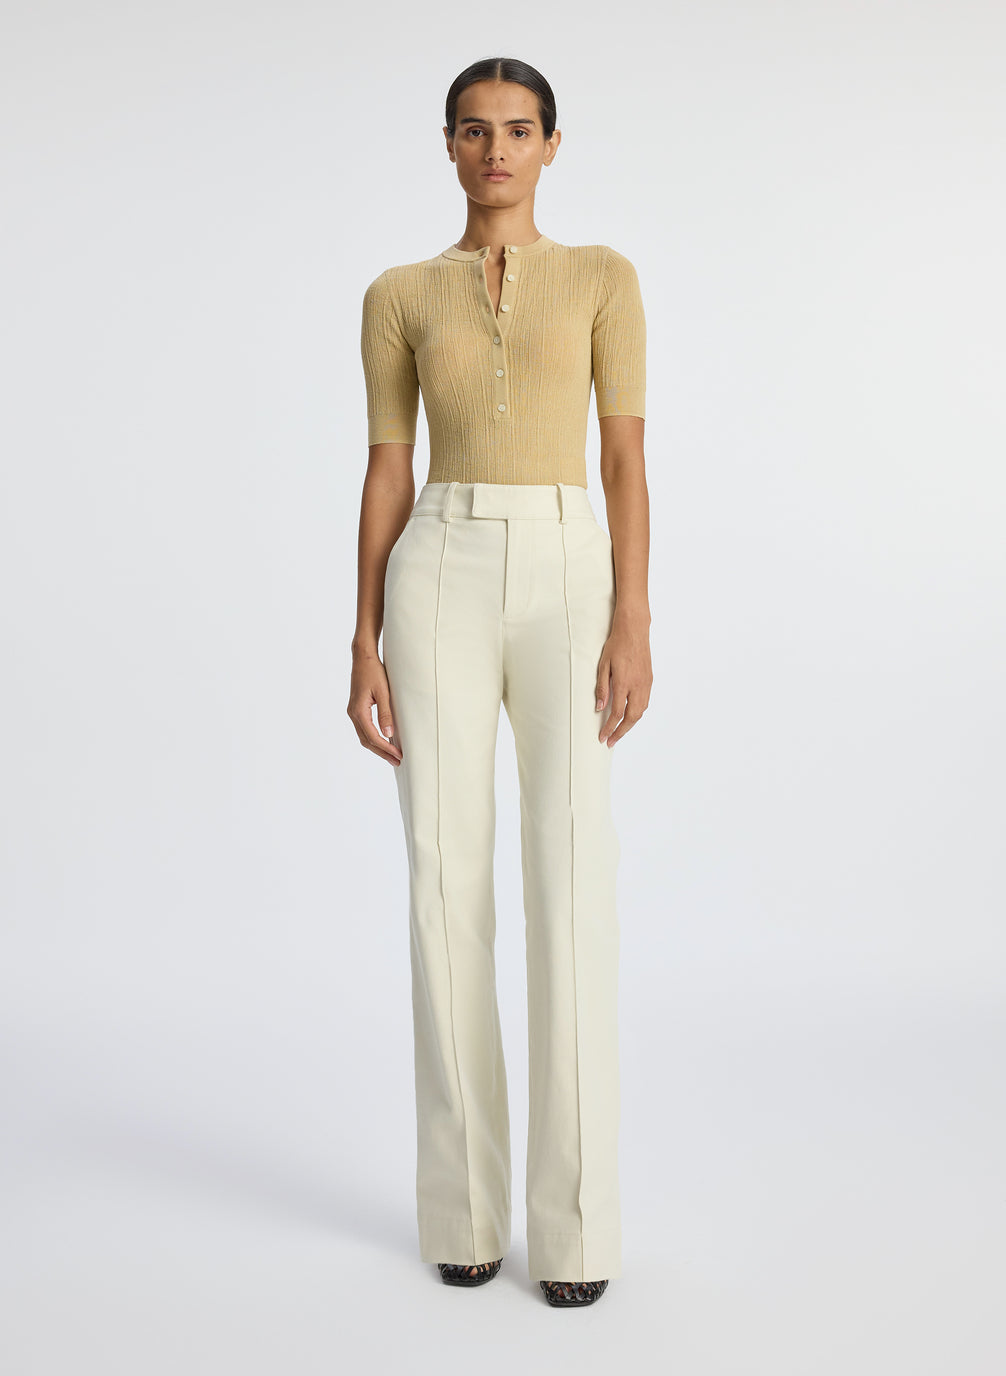 front  view of woman wearing beige half sleeve button placket shirt and cream pants